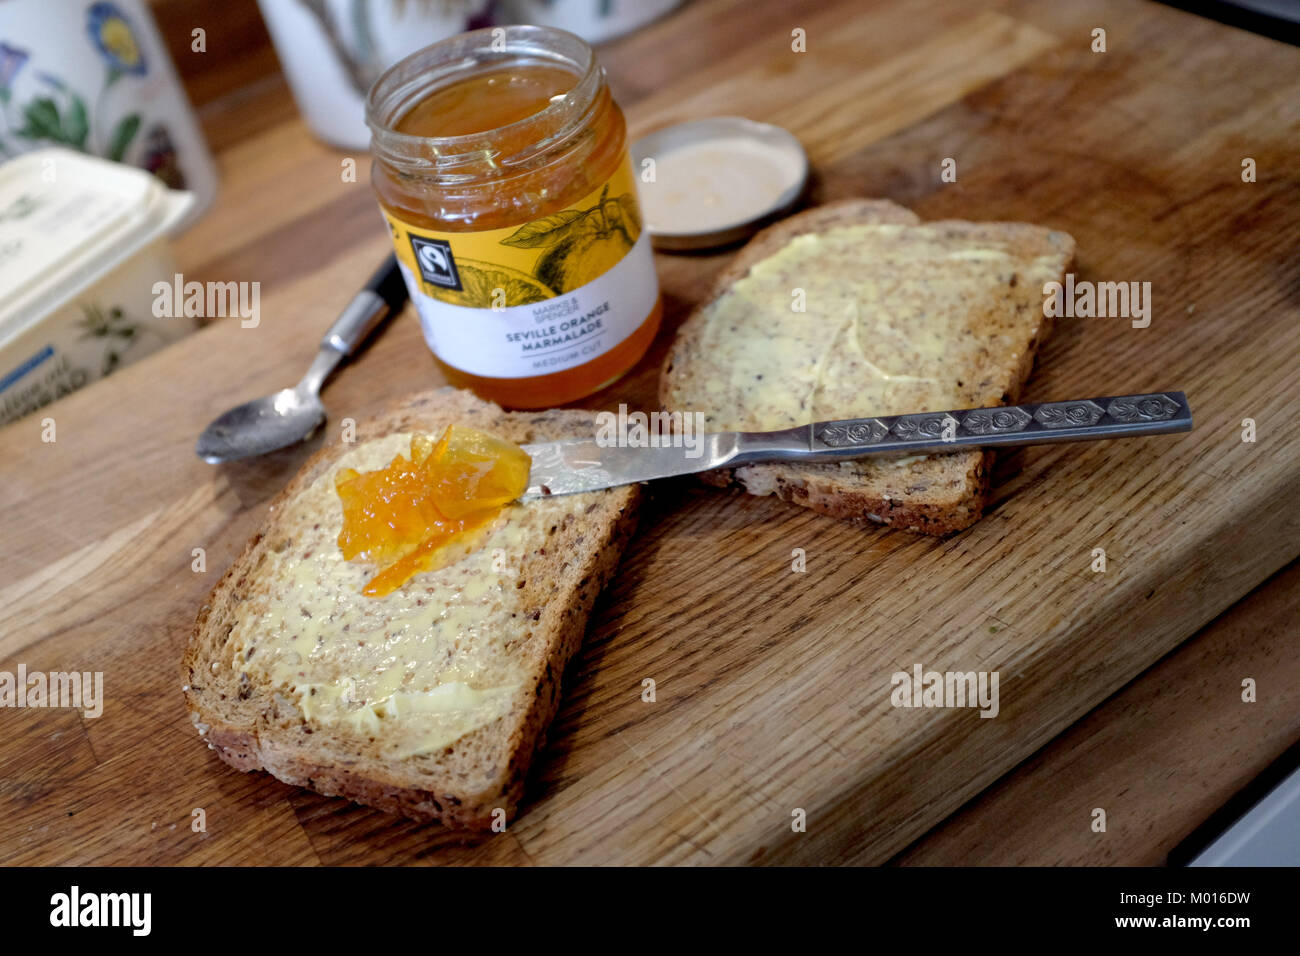 Wholemeal brown toast with M&S Seville Orange Marmalade Stock Photo